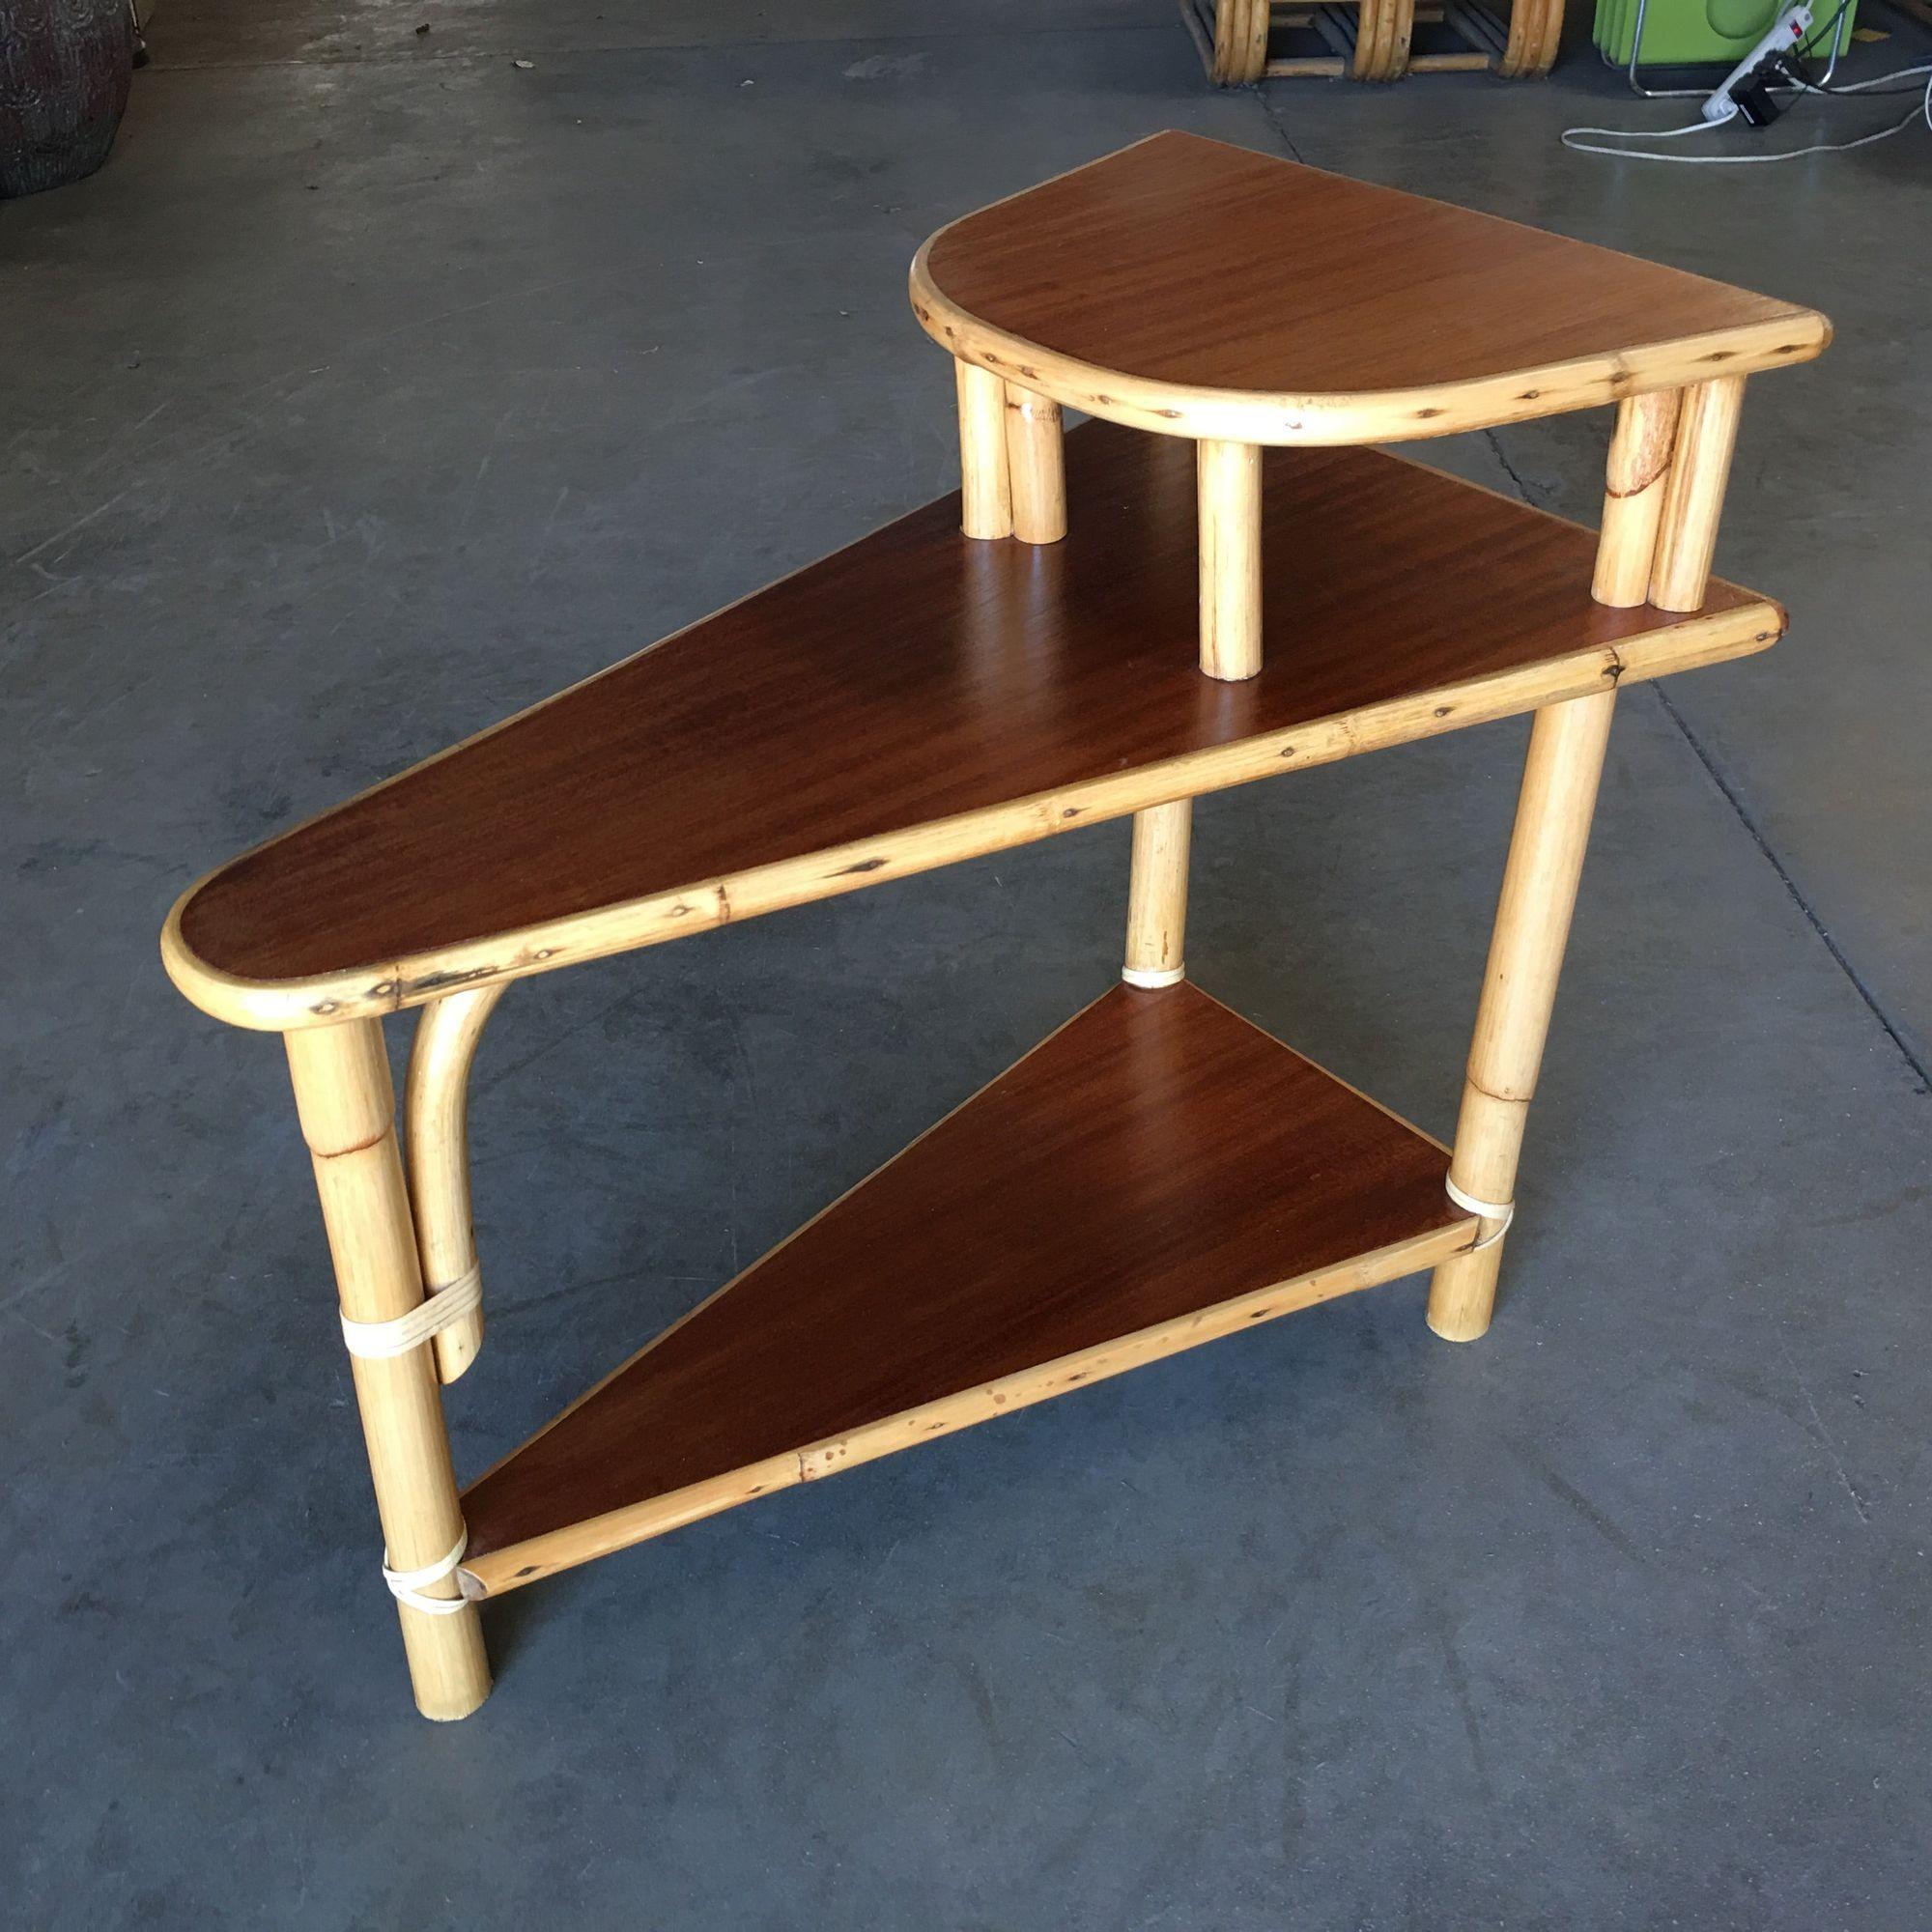 Restored 3-Tier Wedge Side Table w/Mahogany Tops In Excellent Condition For Sale In Van Nuys, CA